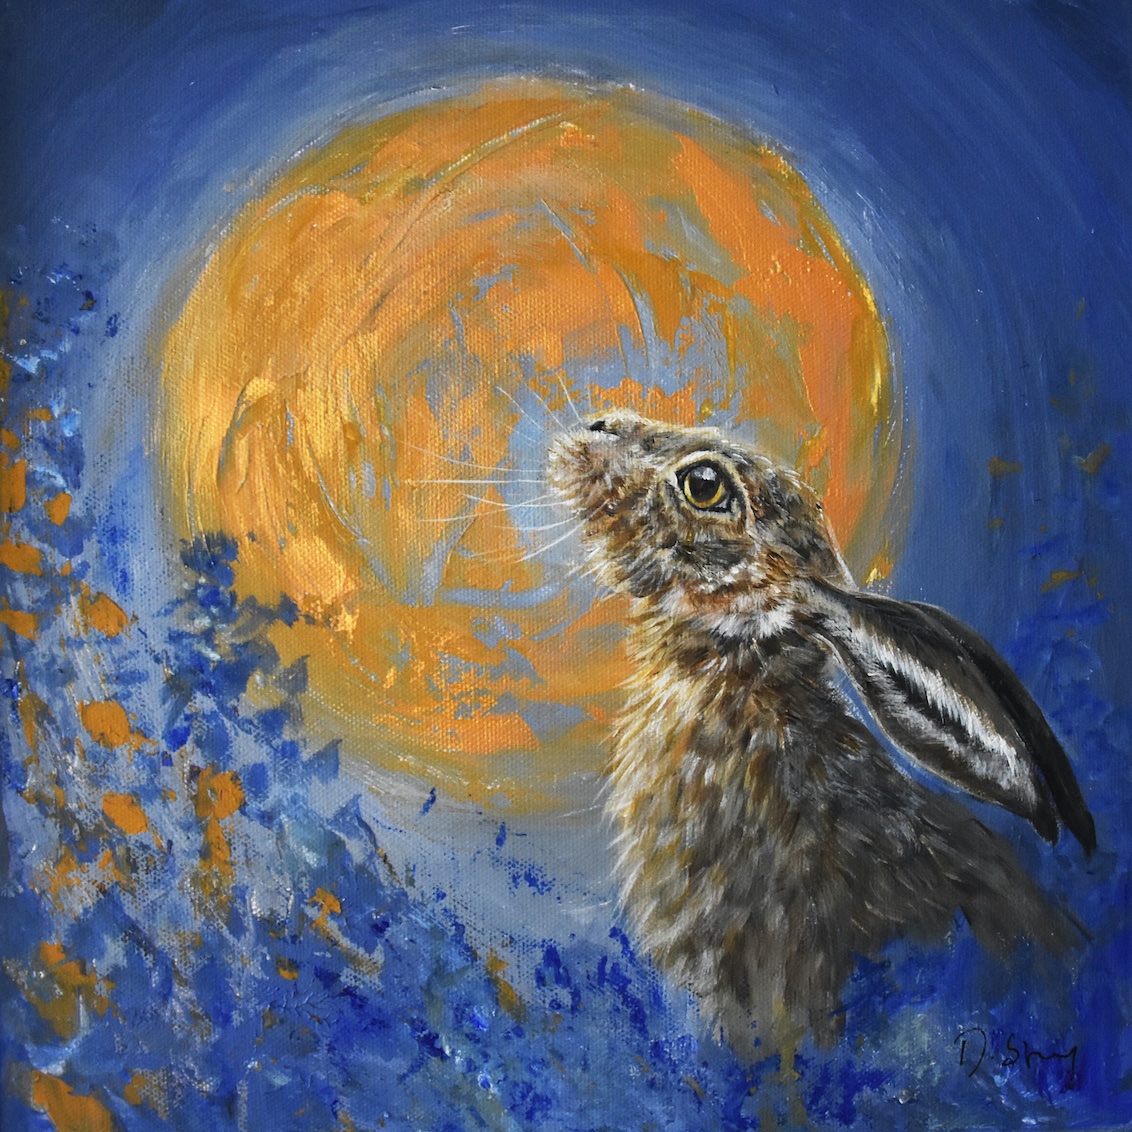 Debbie Storey's Wild Encounter Exhibition continues today at The Pennoyer Centre - allthingsnorfolk.com/events/wild-en…